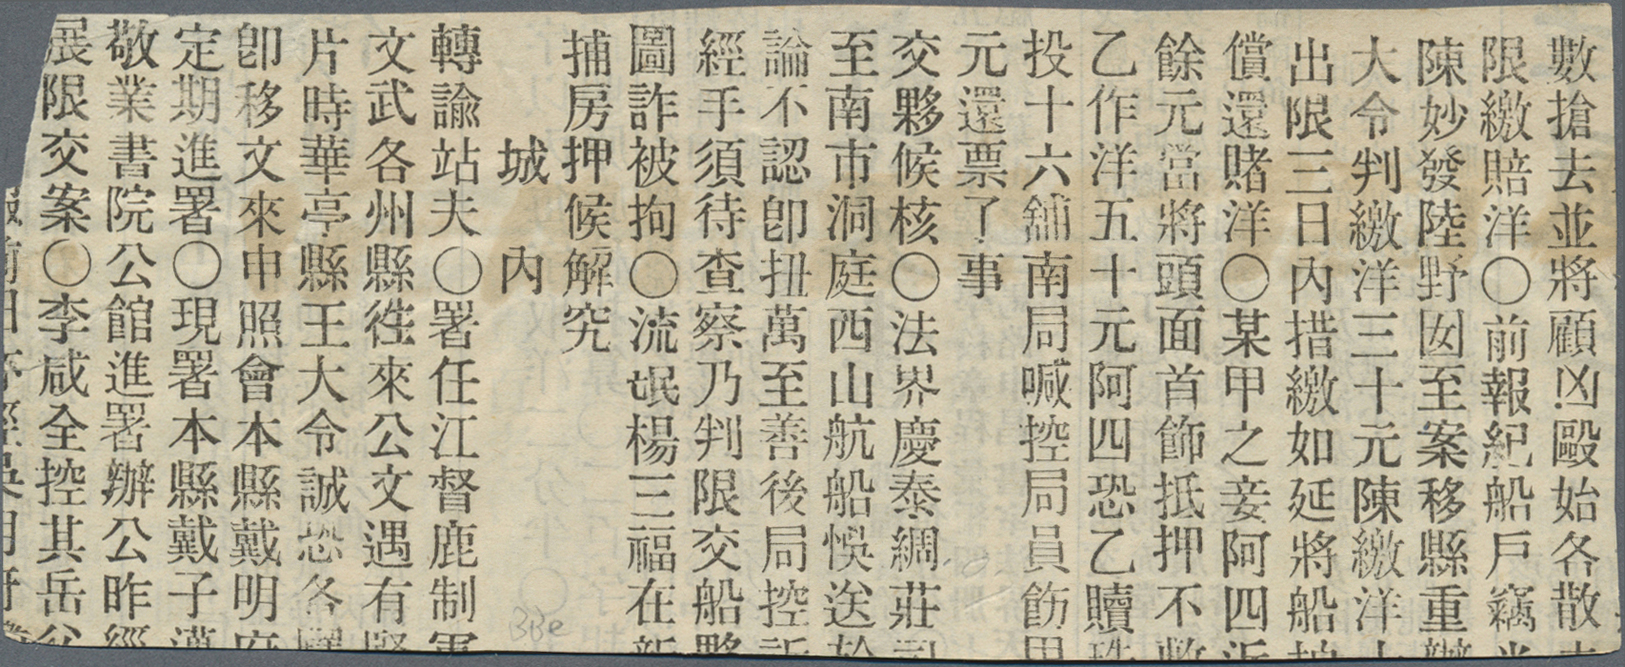 Br/ Japanische Post In China: 1901. News-Band Wrapper Front Addressed To 'The Chinese World, San Francisco' Bearing Chin - 1943-45 Shanghai & Nanjing